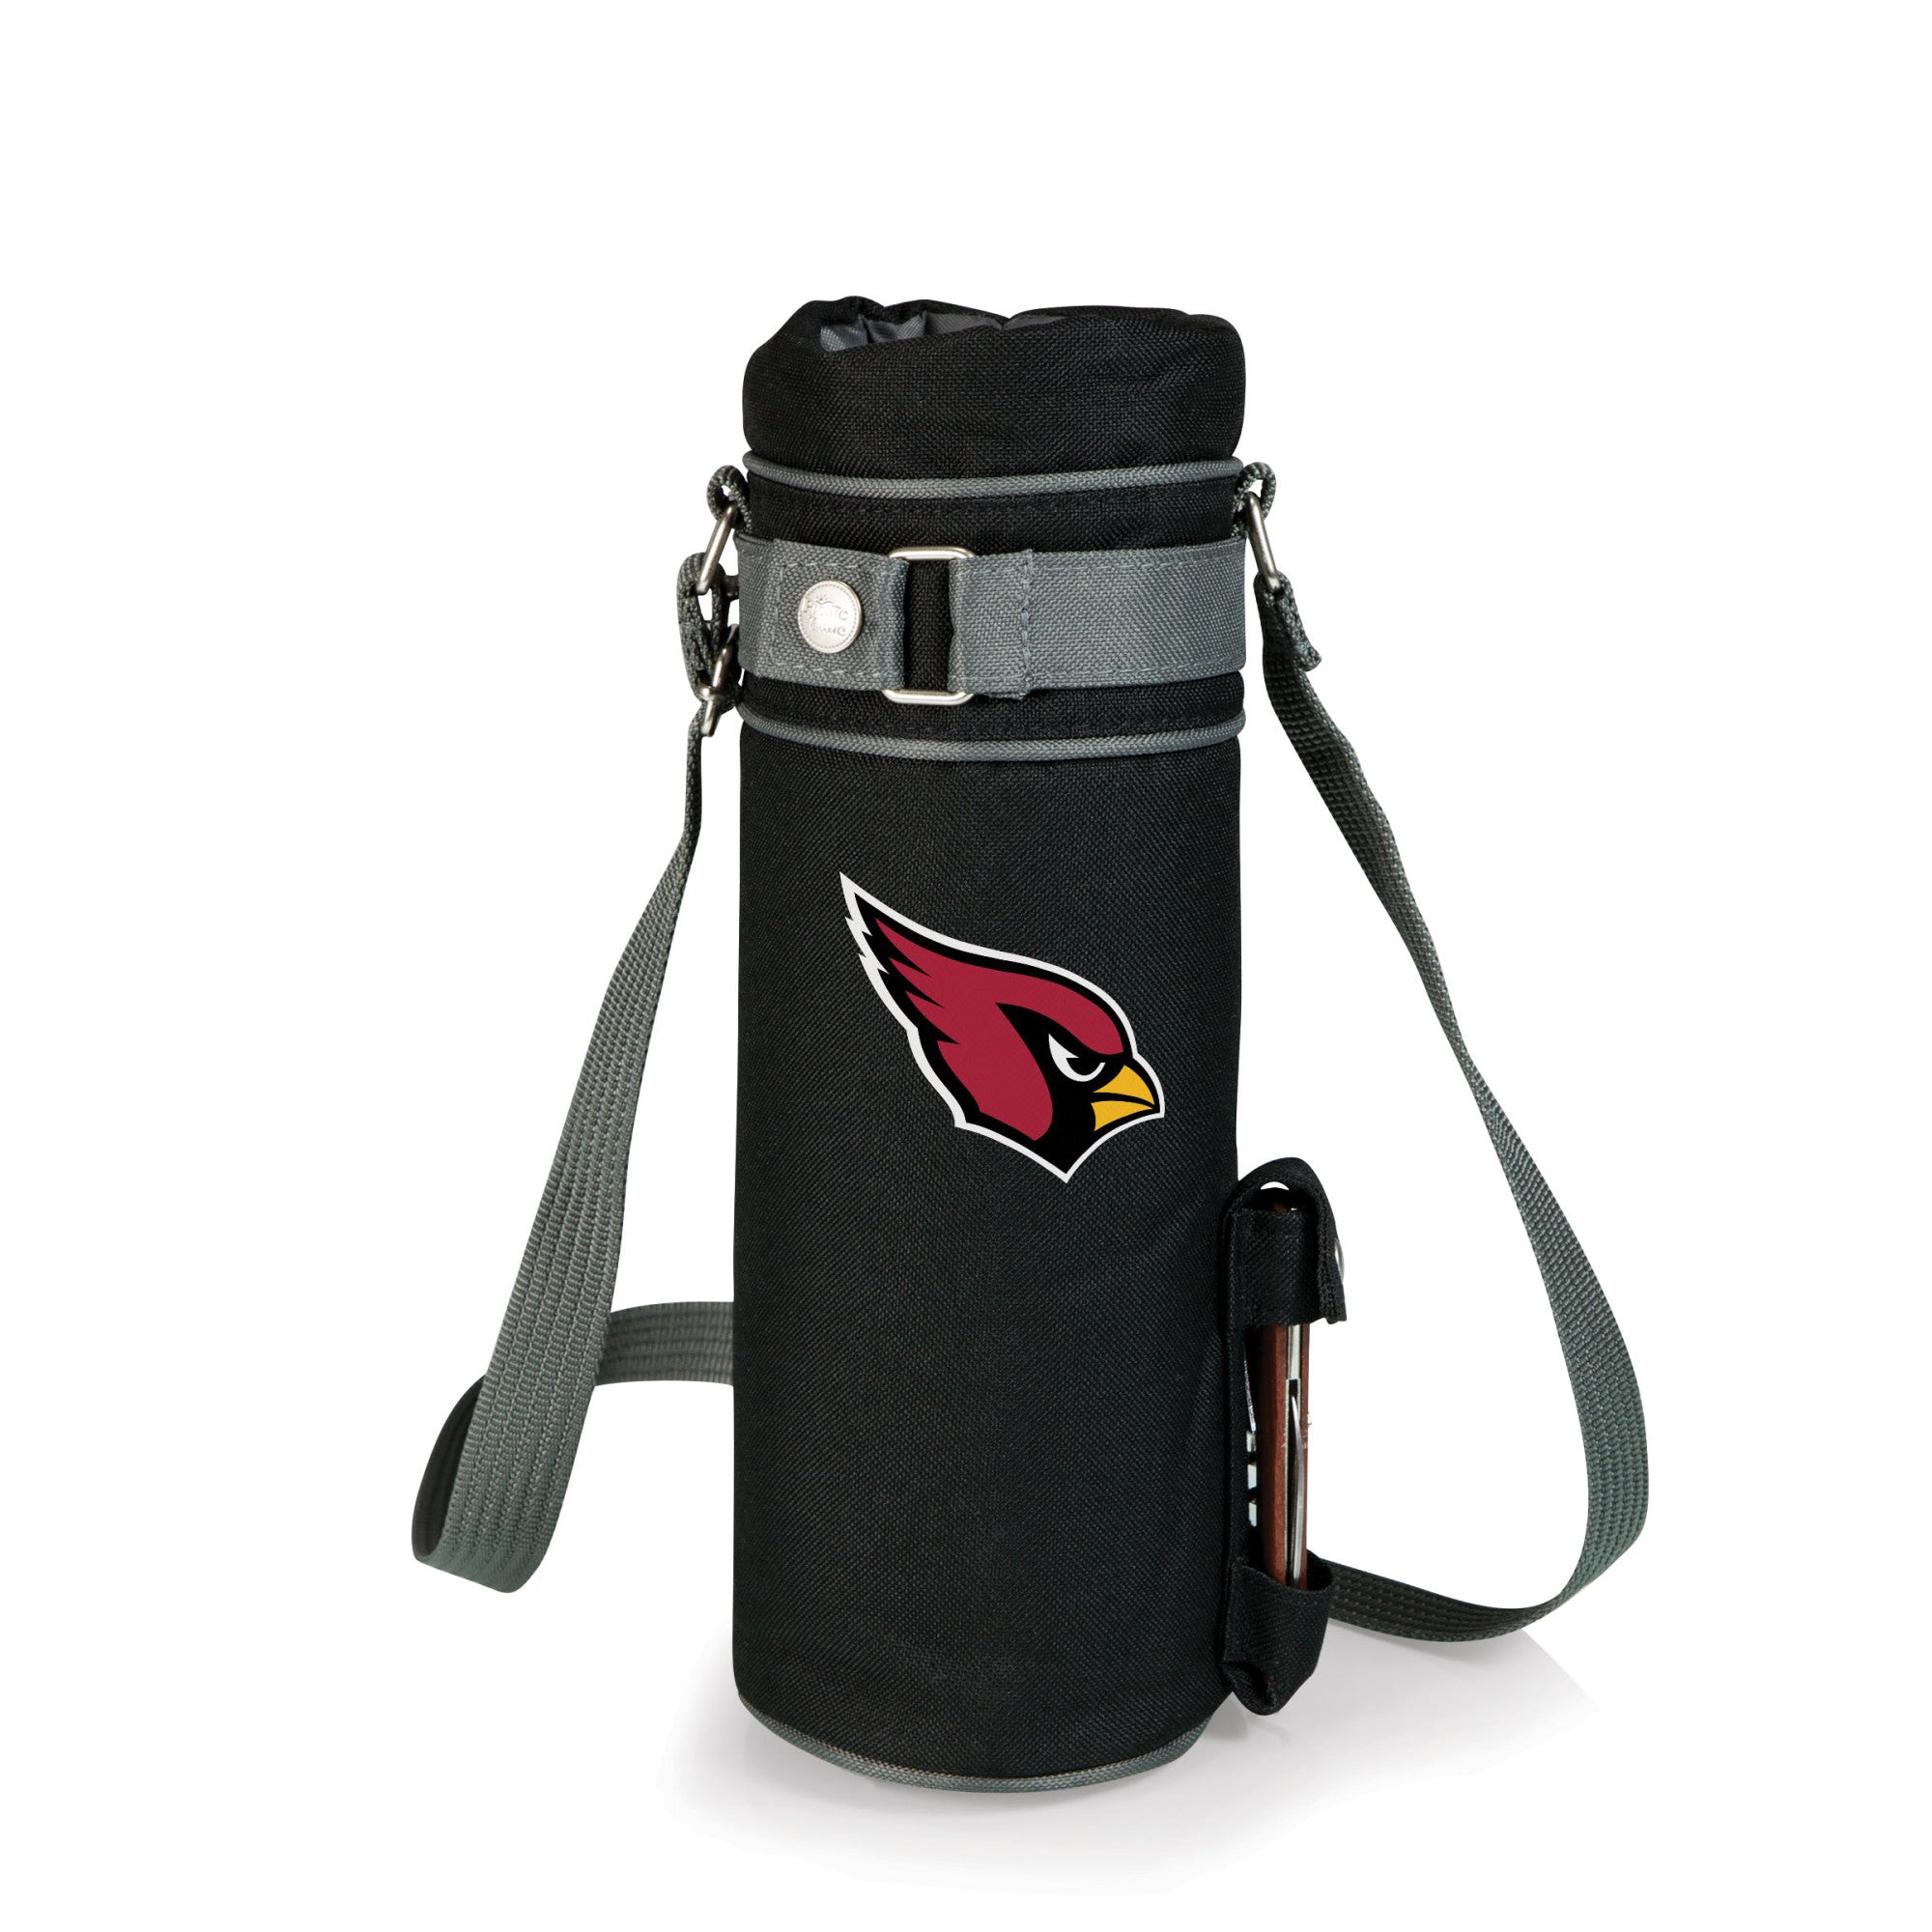 Picnic Time - Arizona cardinals - wine sack beverage tote, (black with gray accents)